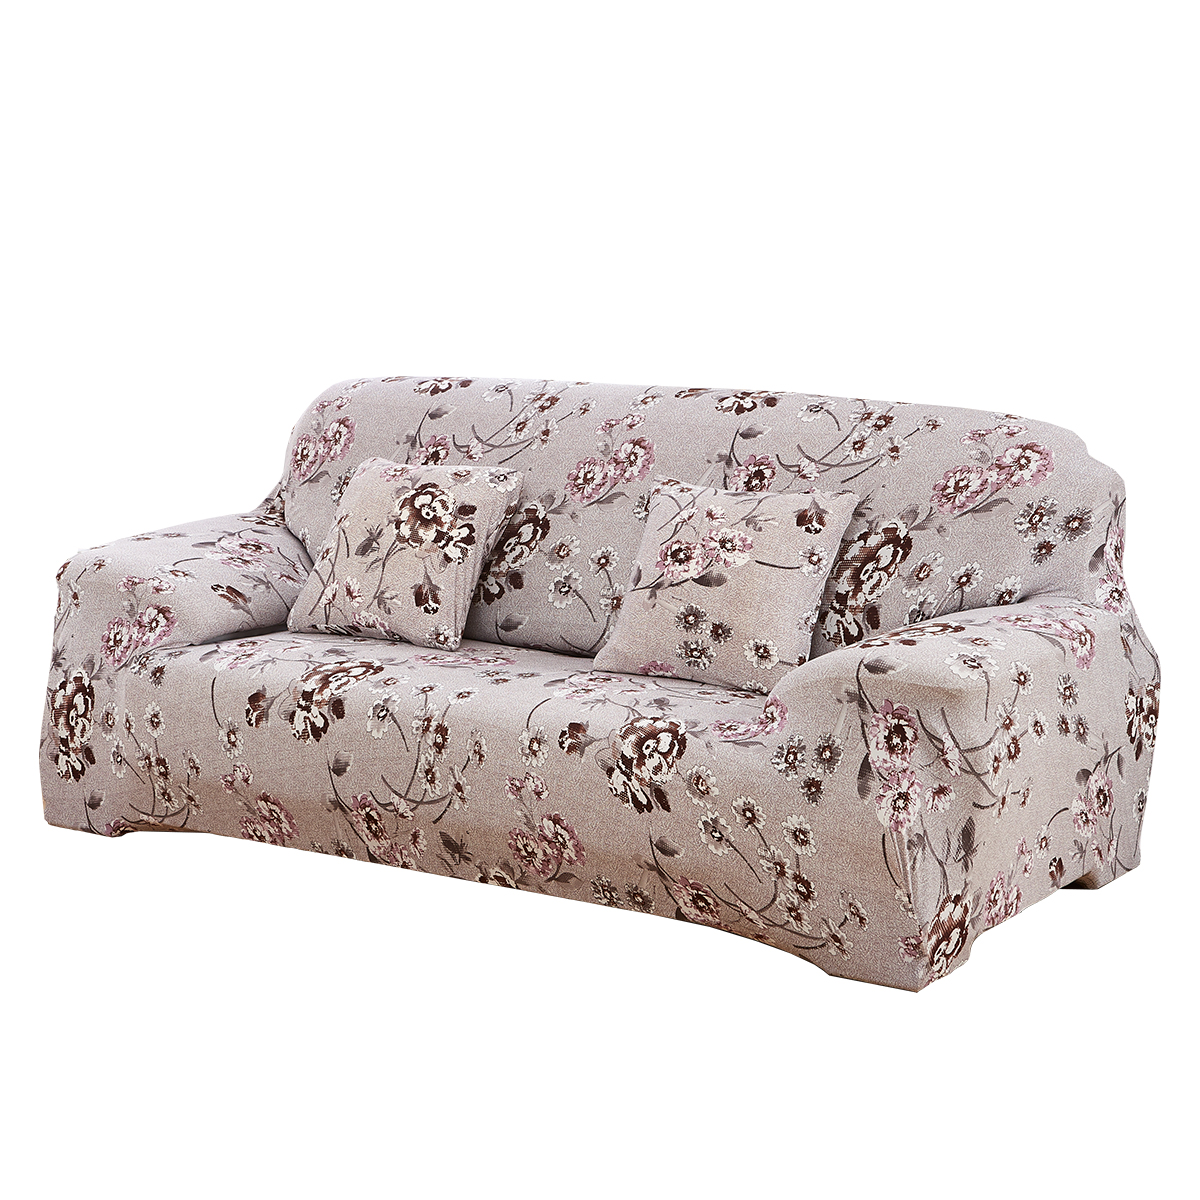 1234-Seaters-Removable-Slipcover-Sofa-Chair-Cover-Stretch-Seater-Covers-1617066-5